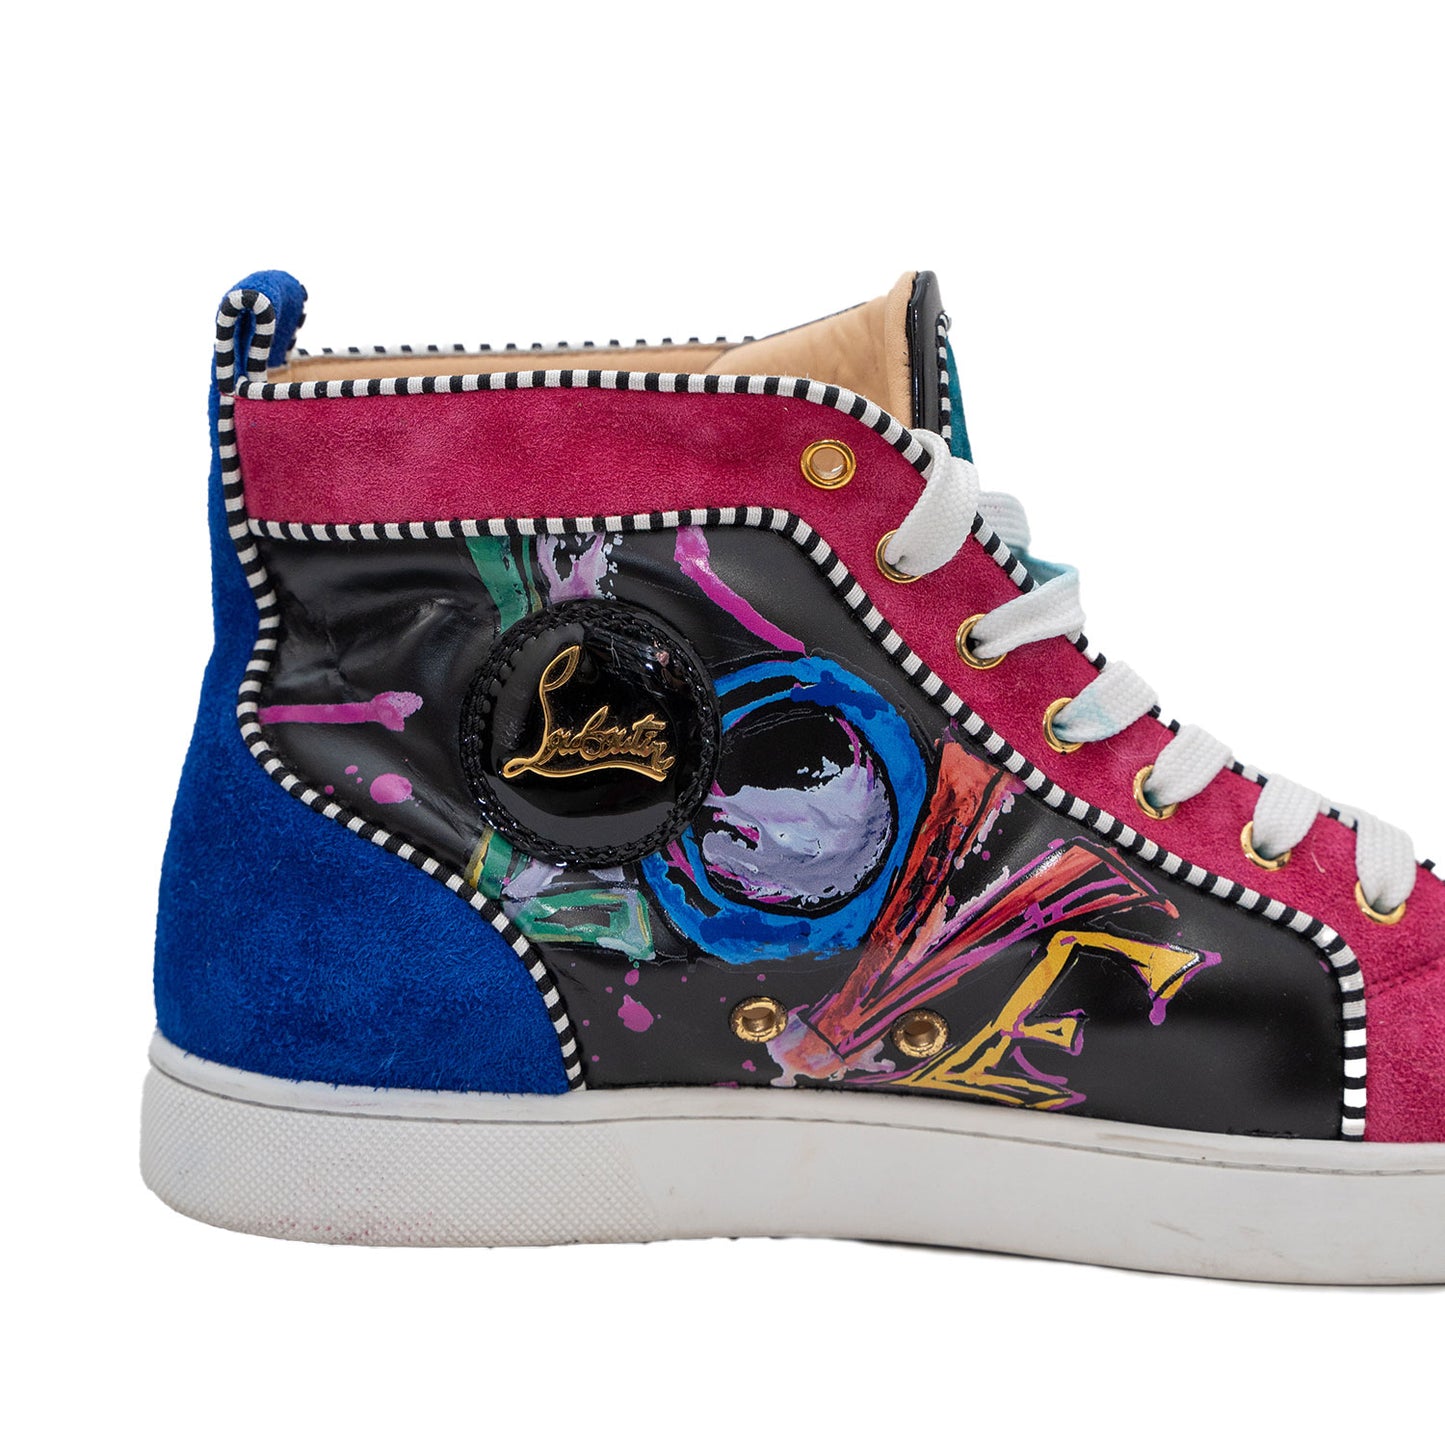 Christian Louboutin LOVE Leather Suede Mid-Top Sneaker